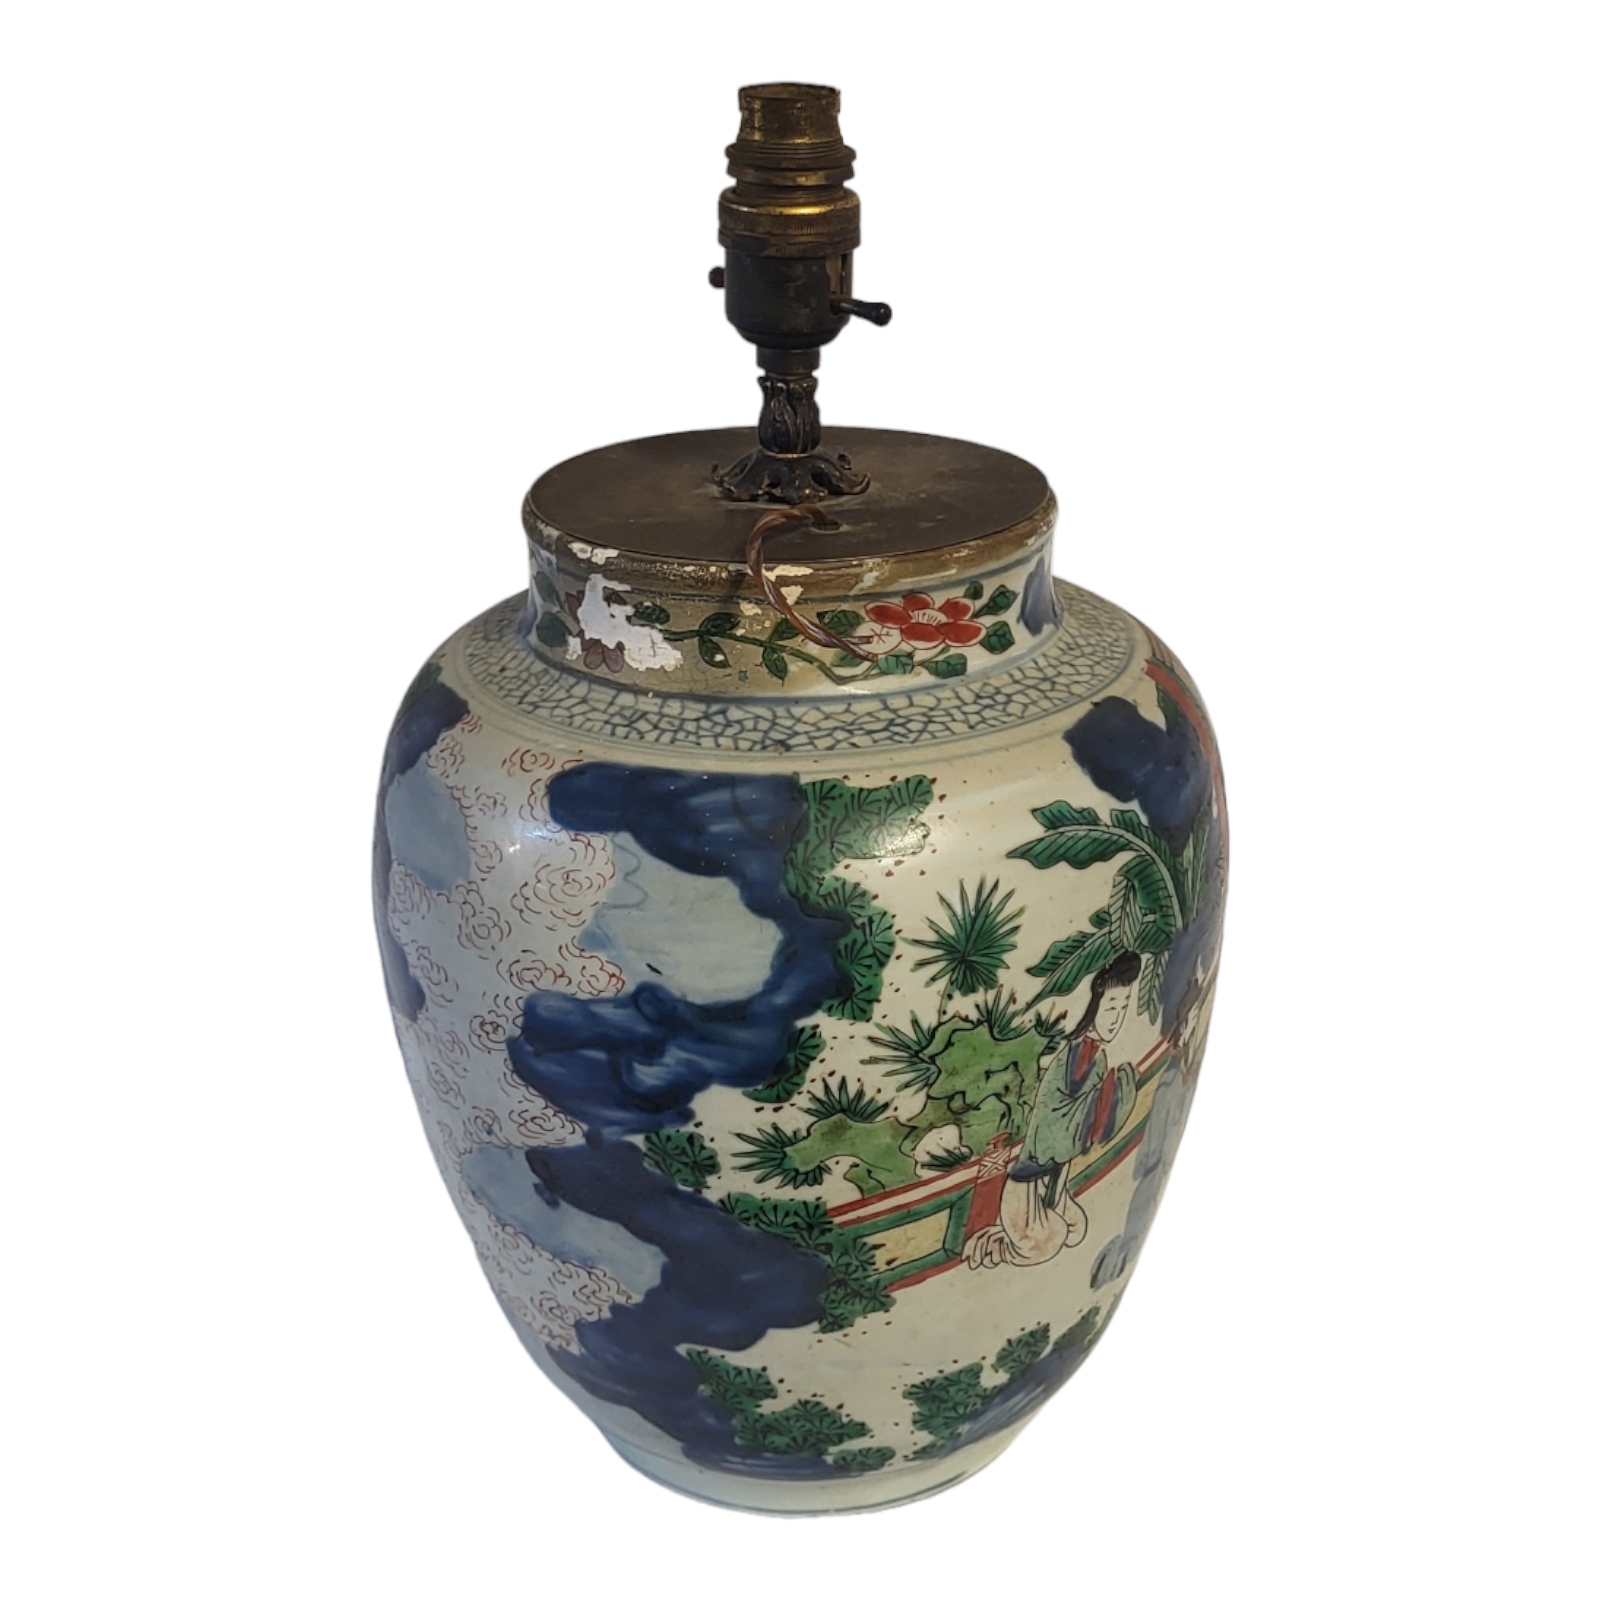 AN 18TH CENTURY CHINESE FAMILLE ROSE/VERTE BALUSTER SHAPED LAMP BASE Polychrome painted with a - Image 2 of 3